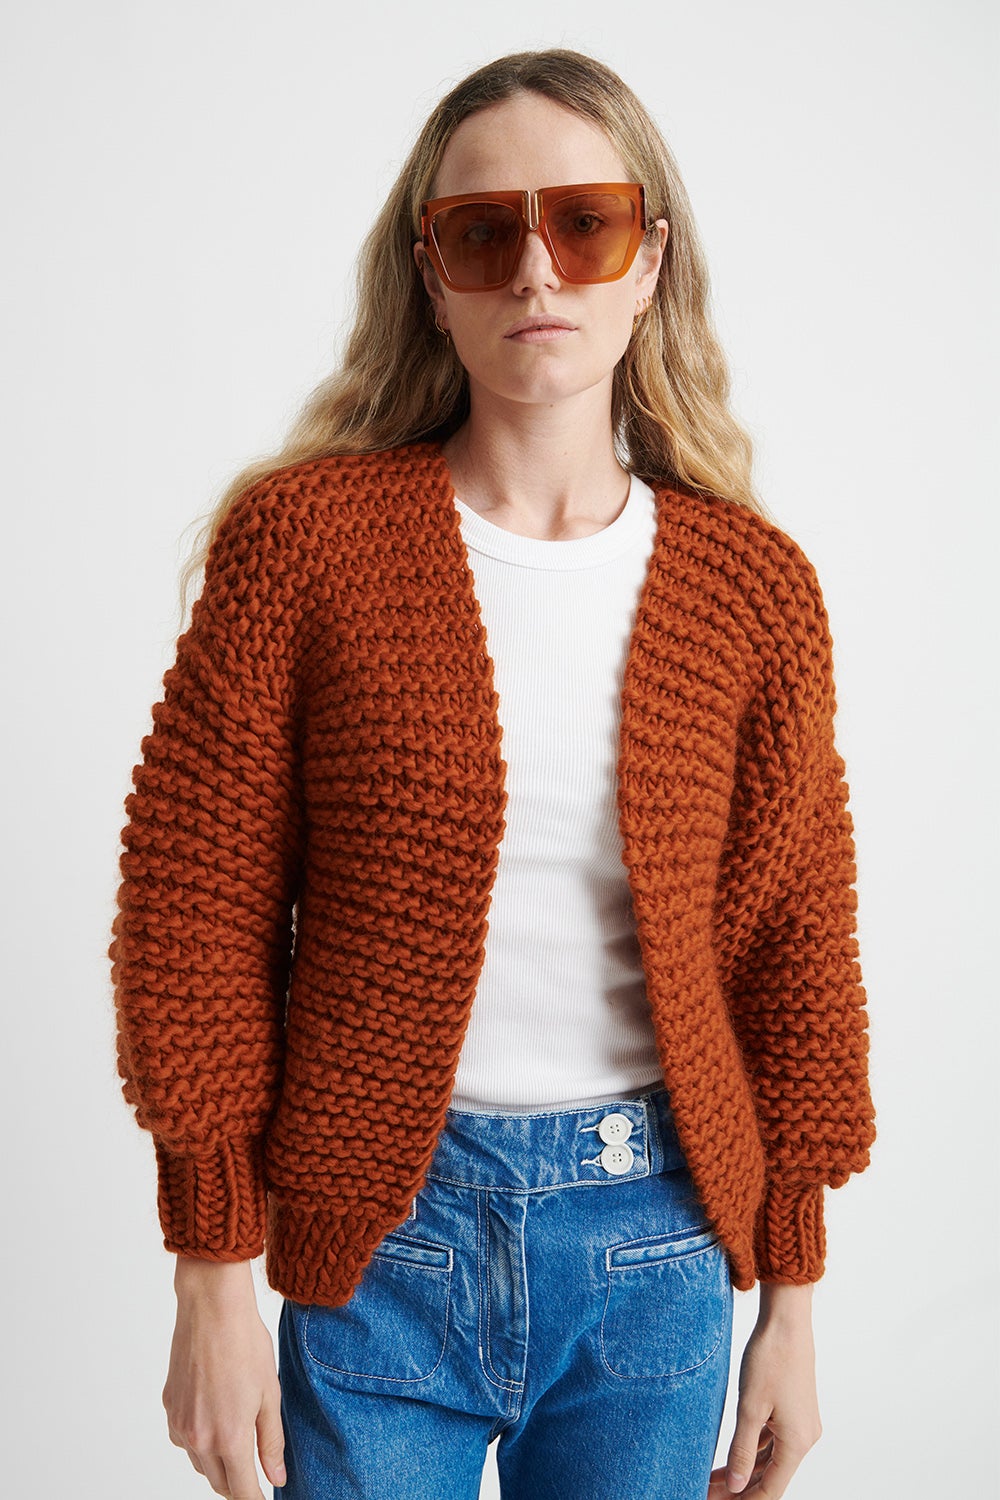 The Knitter Stardust Cardy